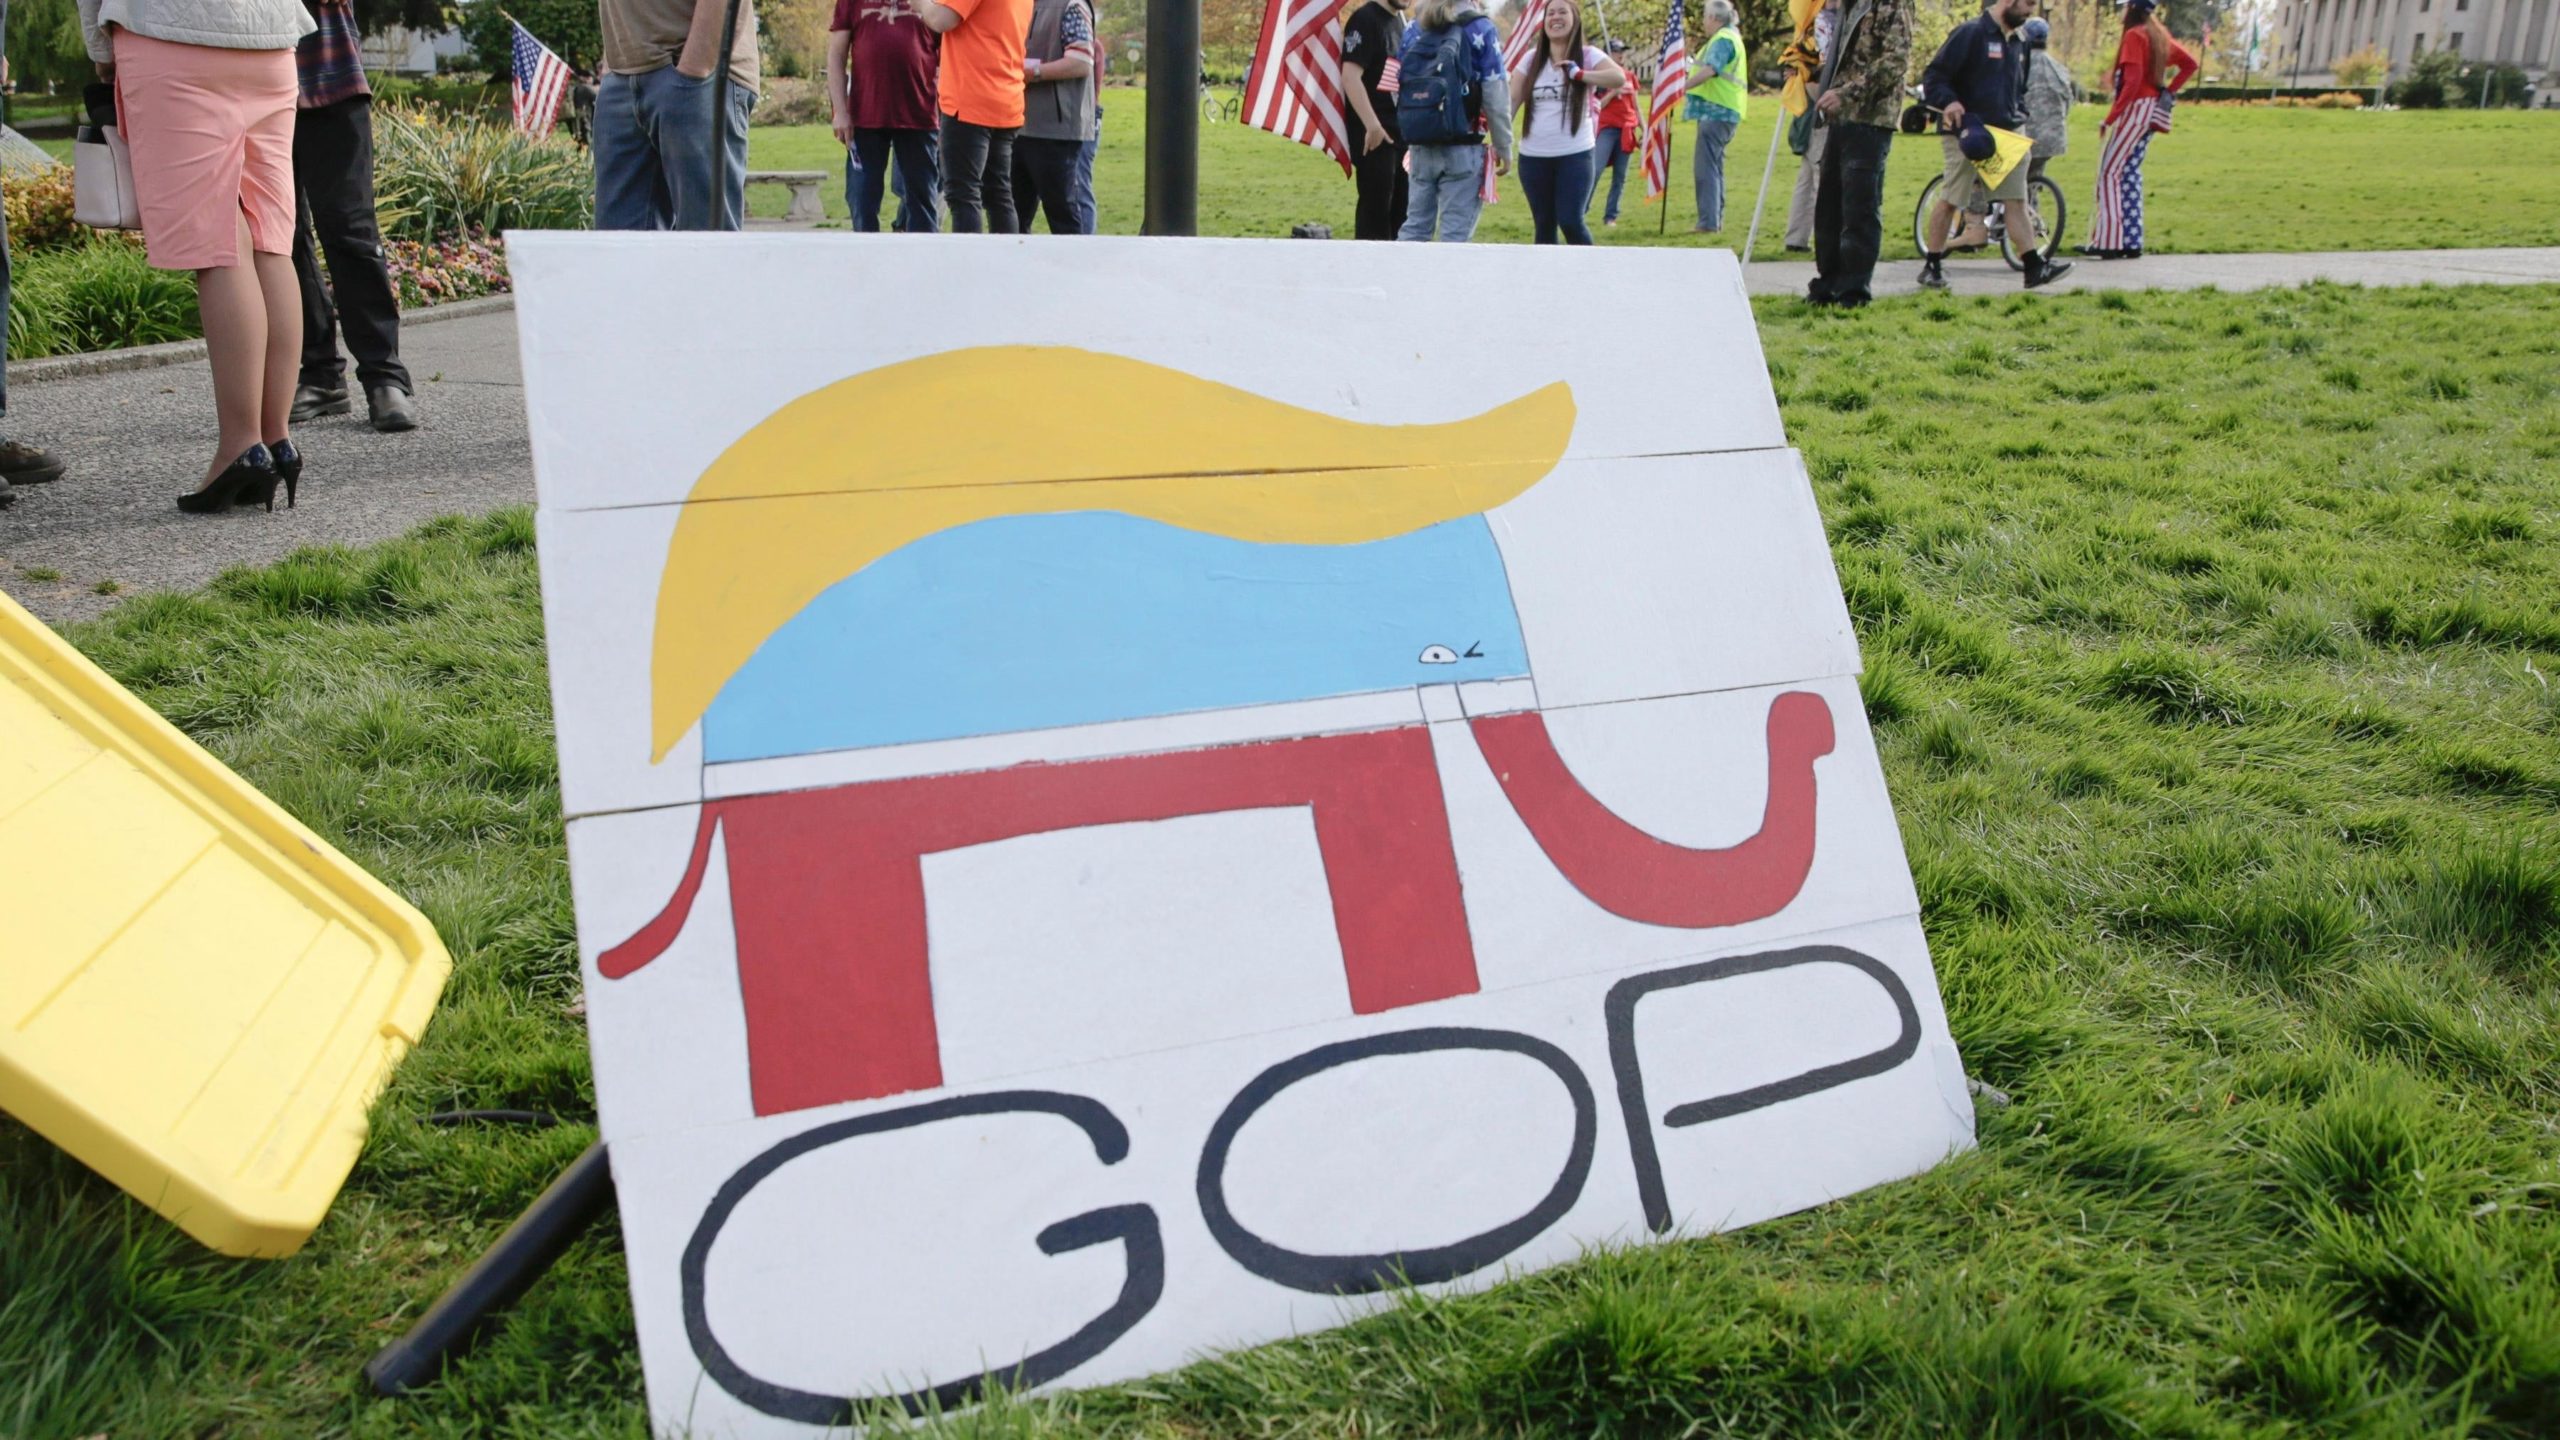 An elephant with Donald Trump's hair, combining the two mascots of the Republican Party, seen at a demonstration in Olympia against a stay-at-home order in the state of Washington in April 2020. (Photo: Jason Redmond / AFP, Getty Images)